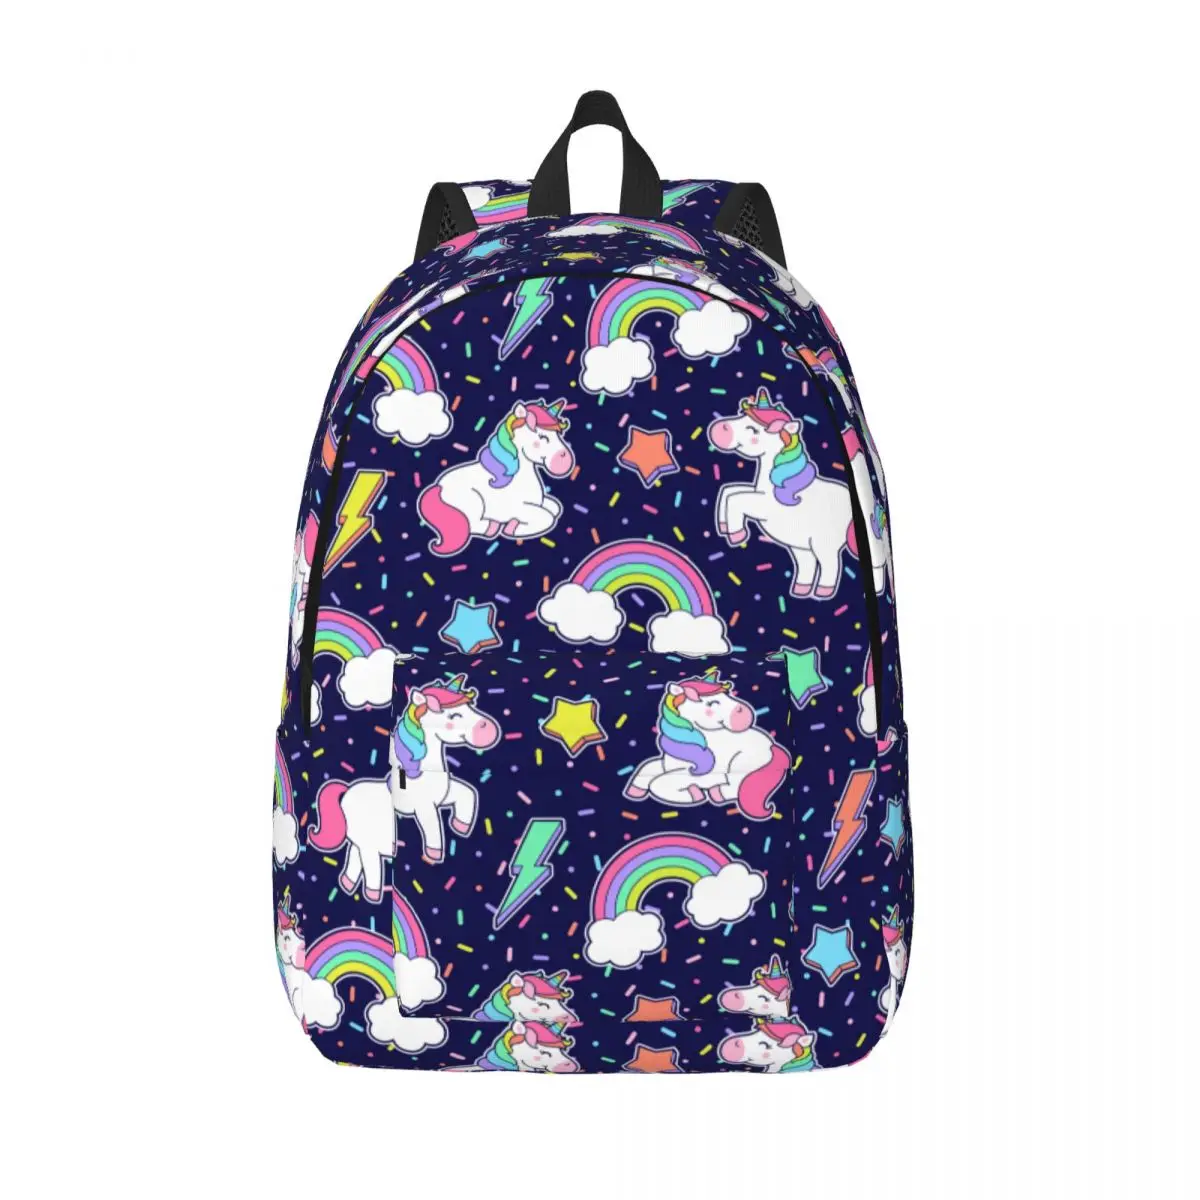 Girl's Schoolbag Colorful Star Rainbow Unicorn Backpack Primary School Student